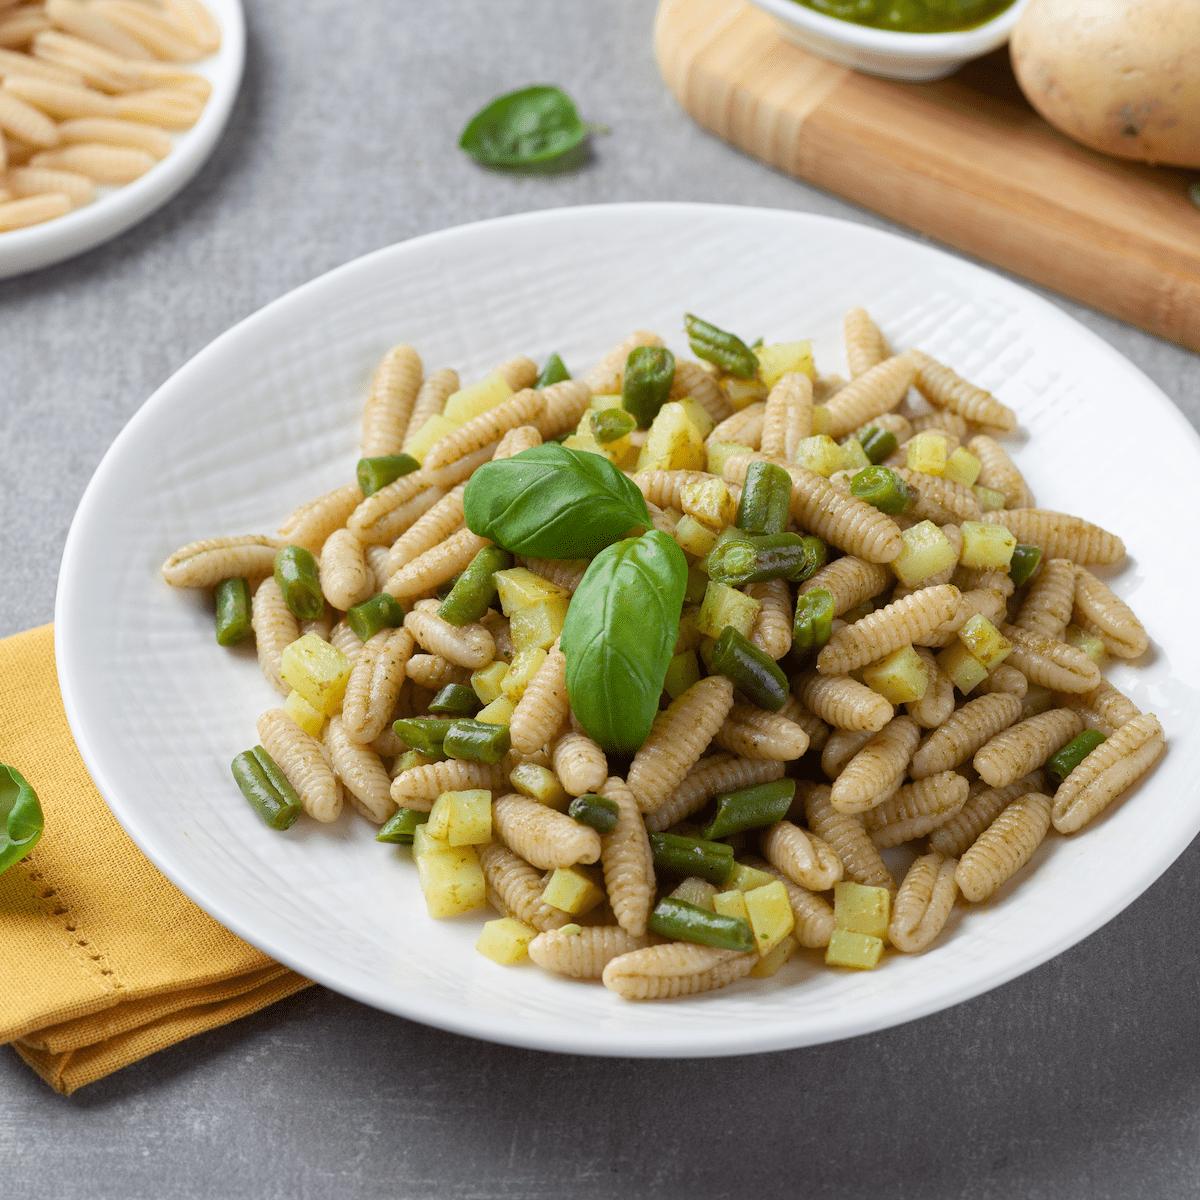 Pasta in pesto sauce with green beans and potato